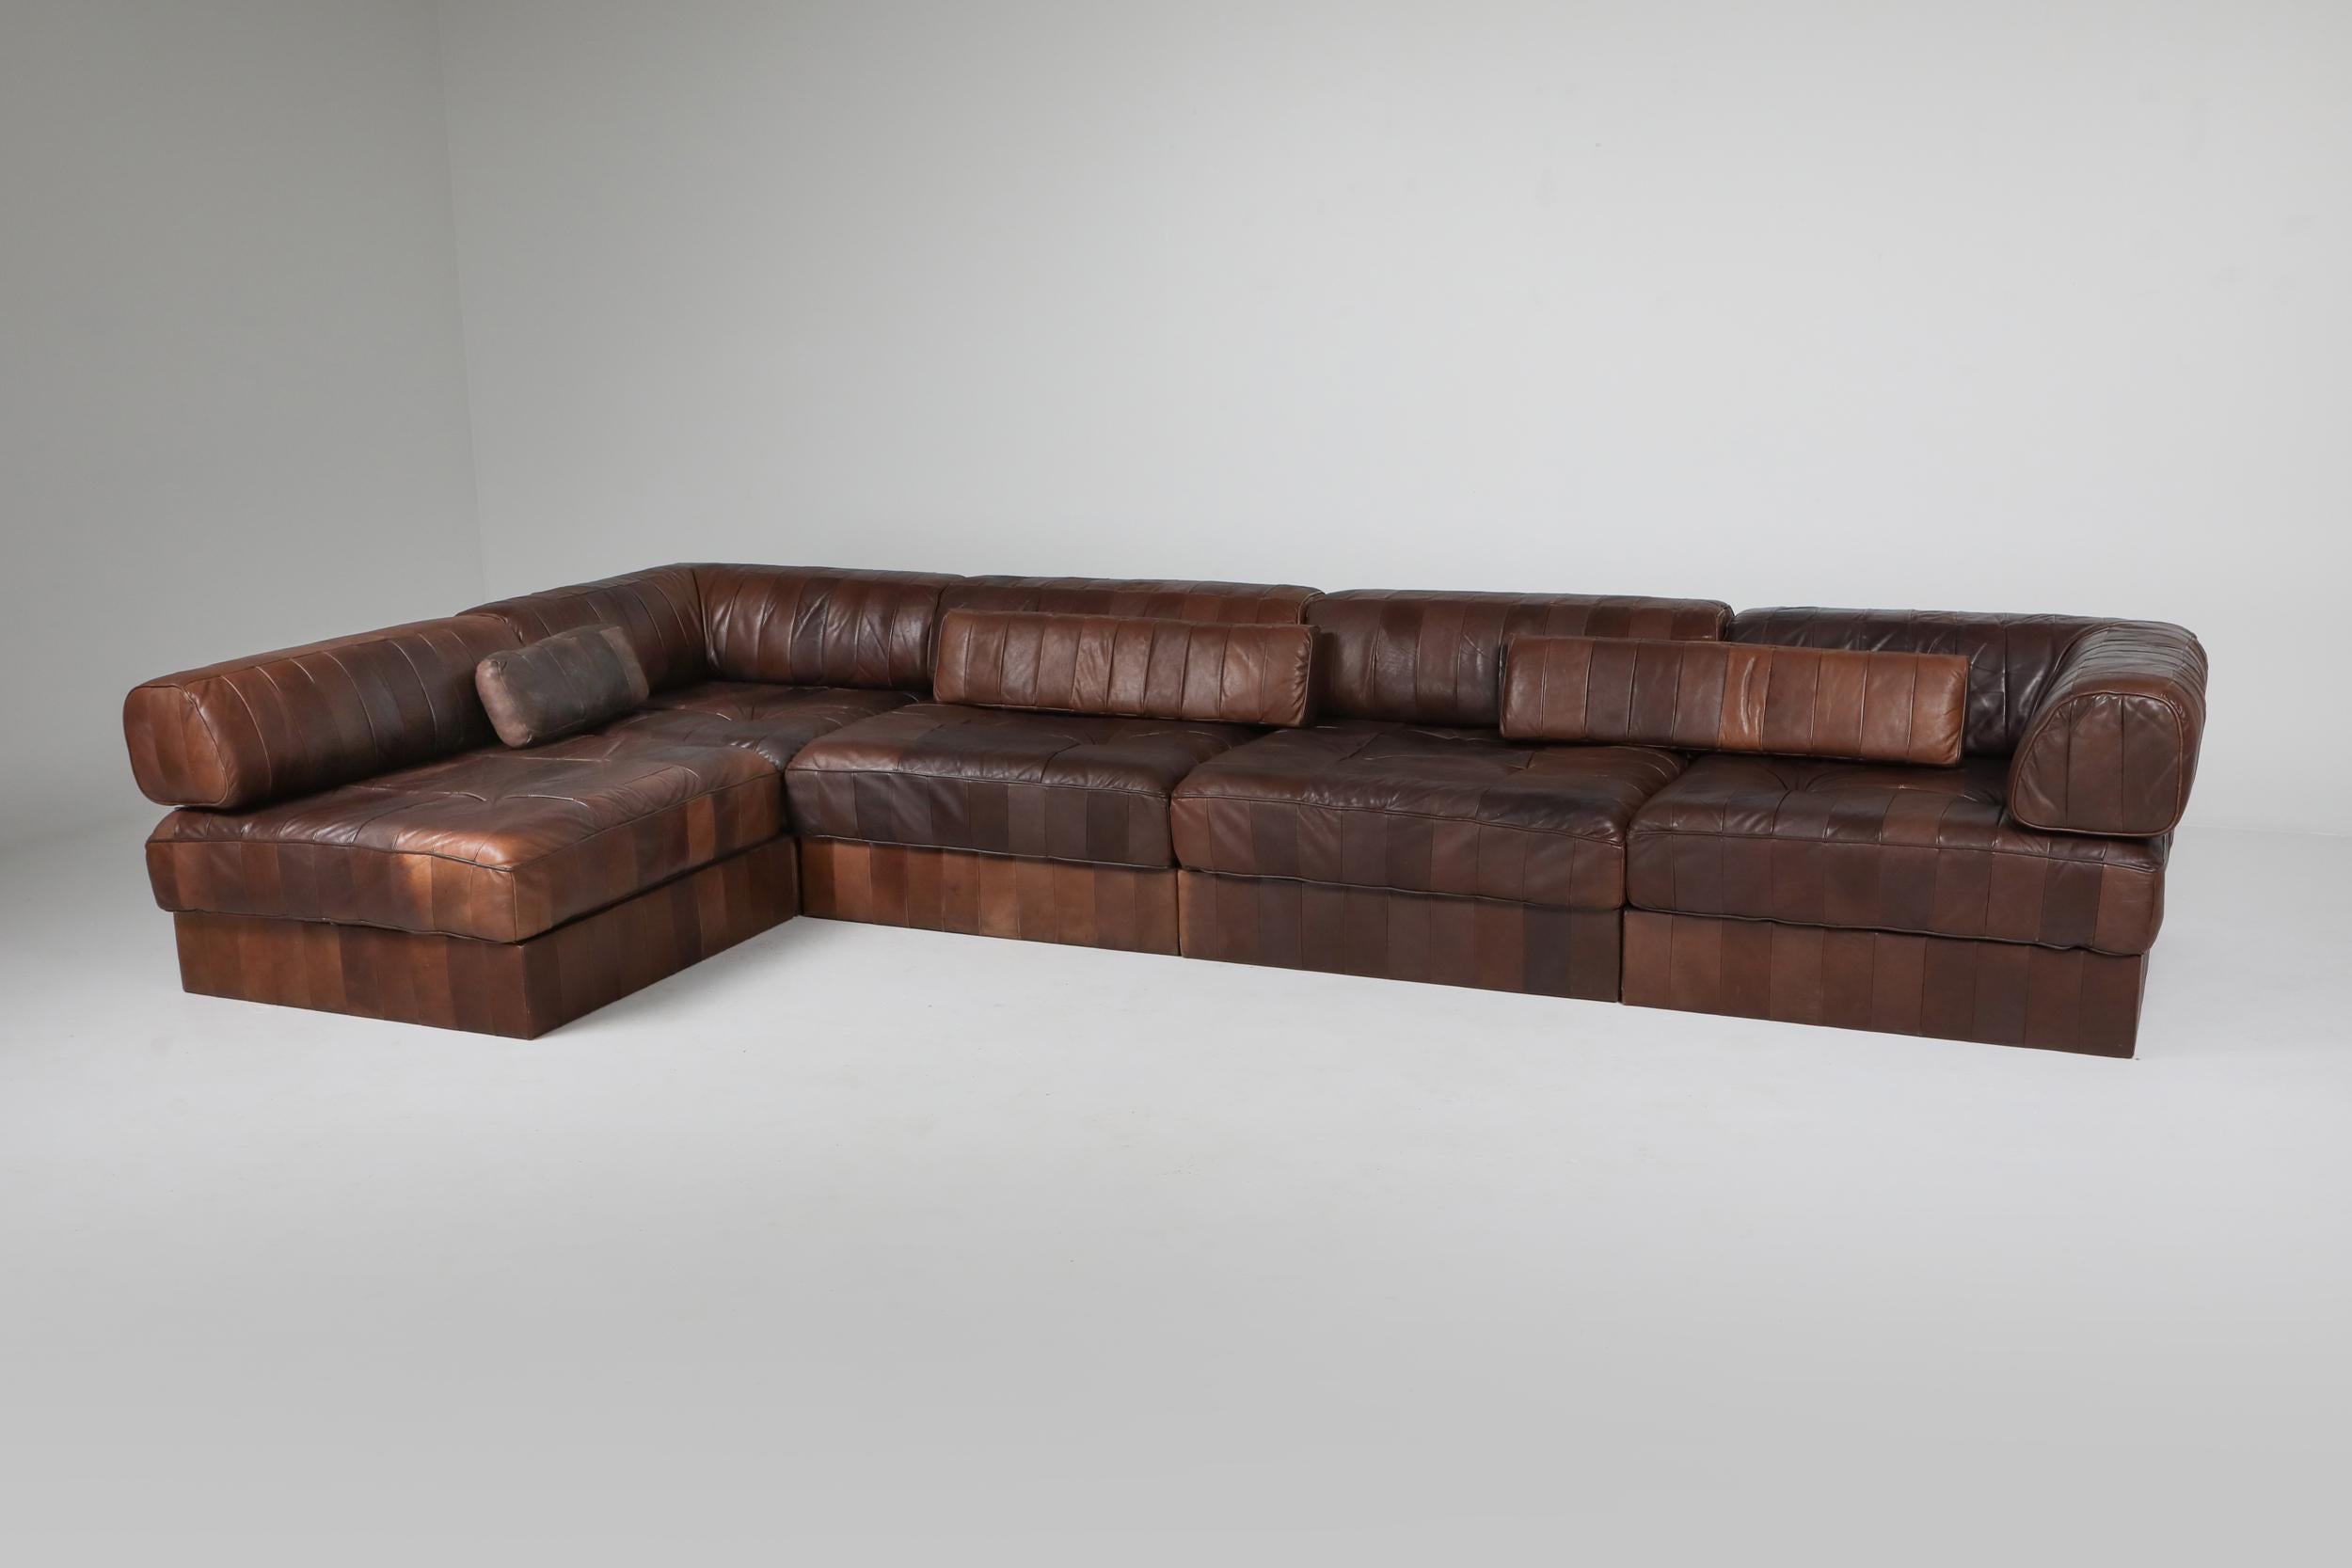 Sectional Modular Sofa in Leather Patchwork by De Sede Switzerland 1